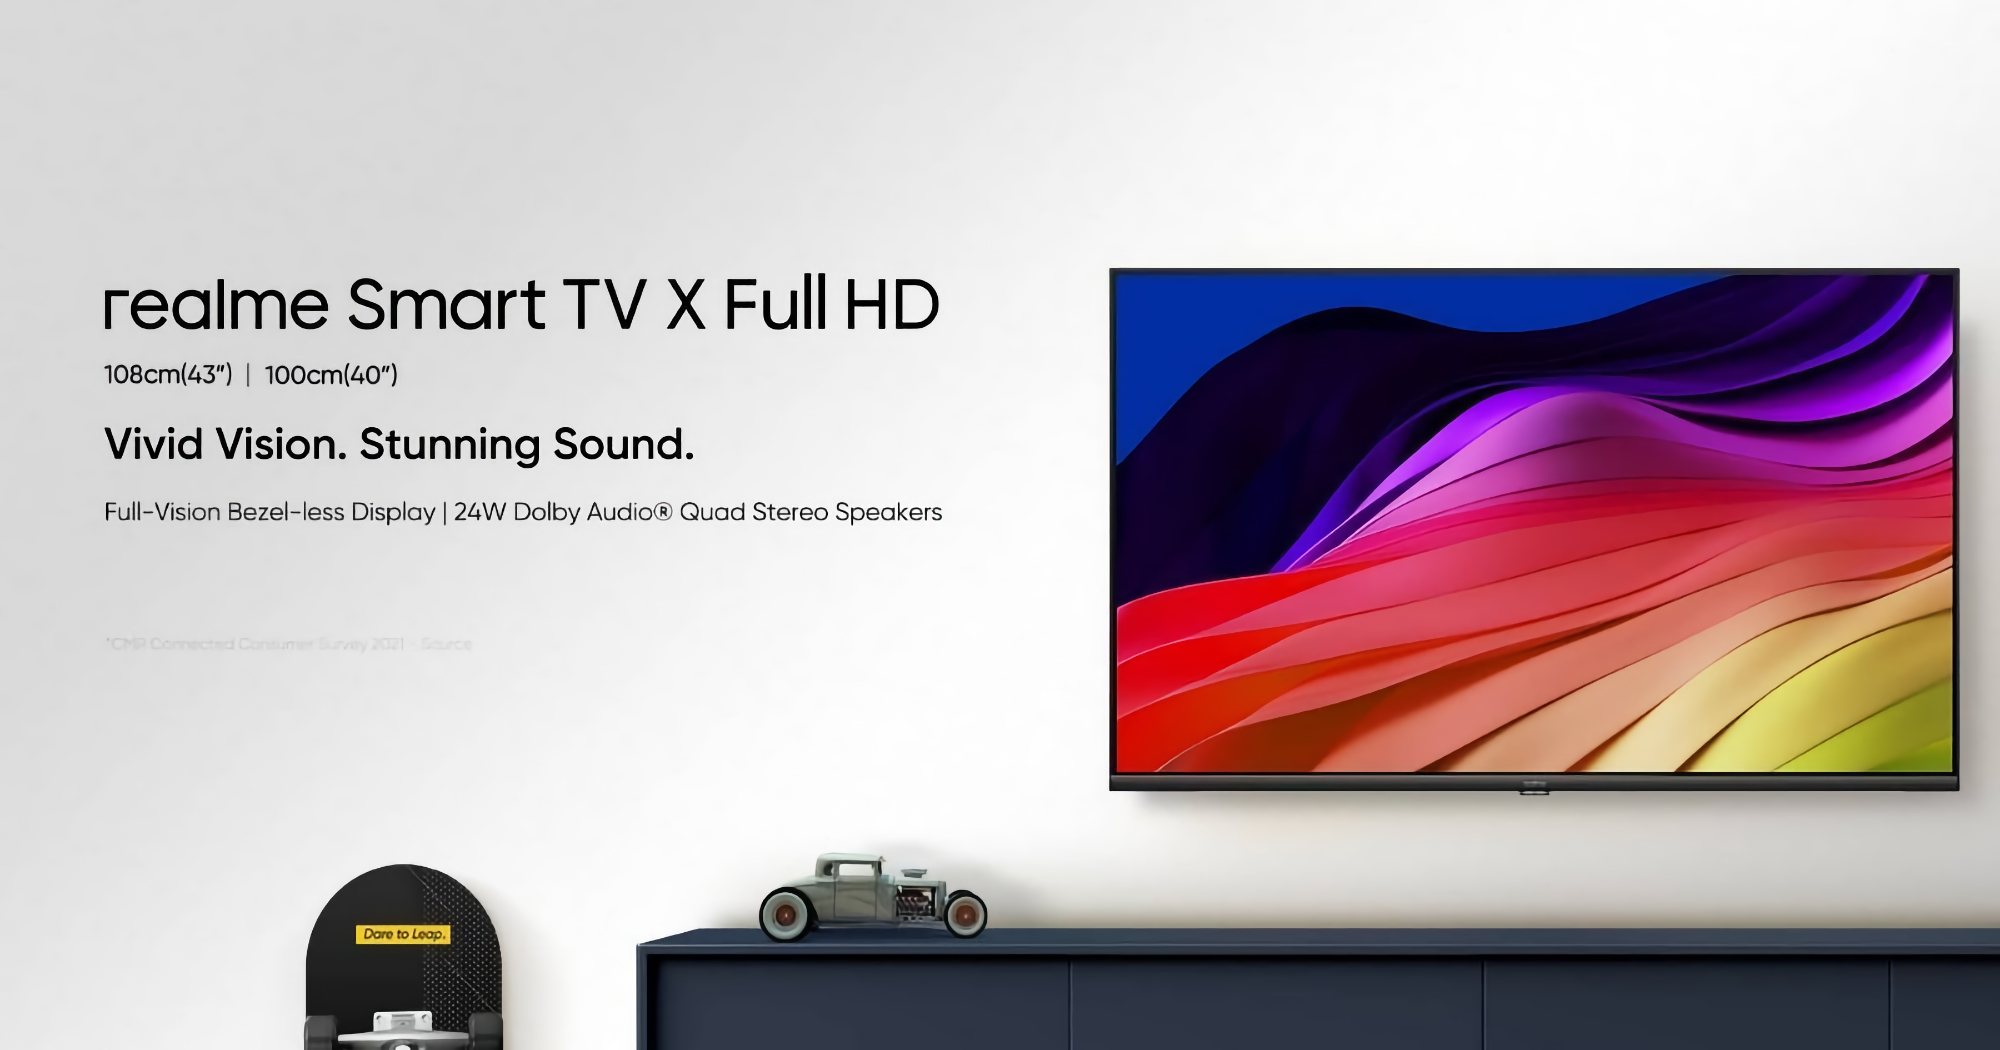 realme is preparing to release a line of Smart TV X Full HD TVs with screens up to 43″, MediaTek chip and 24W speakers